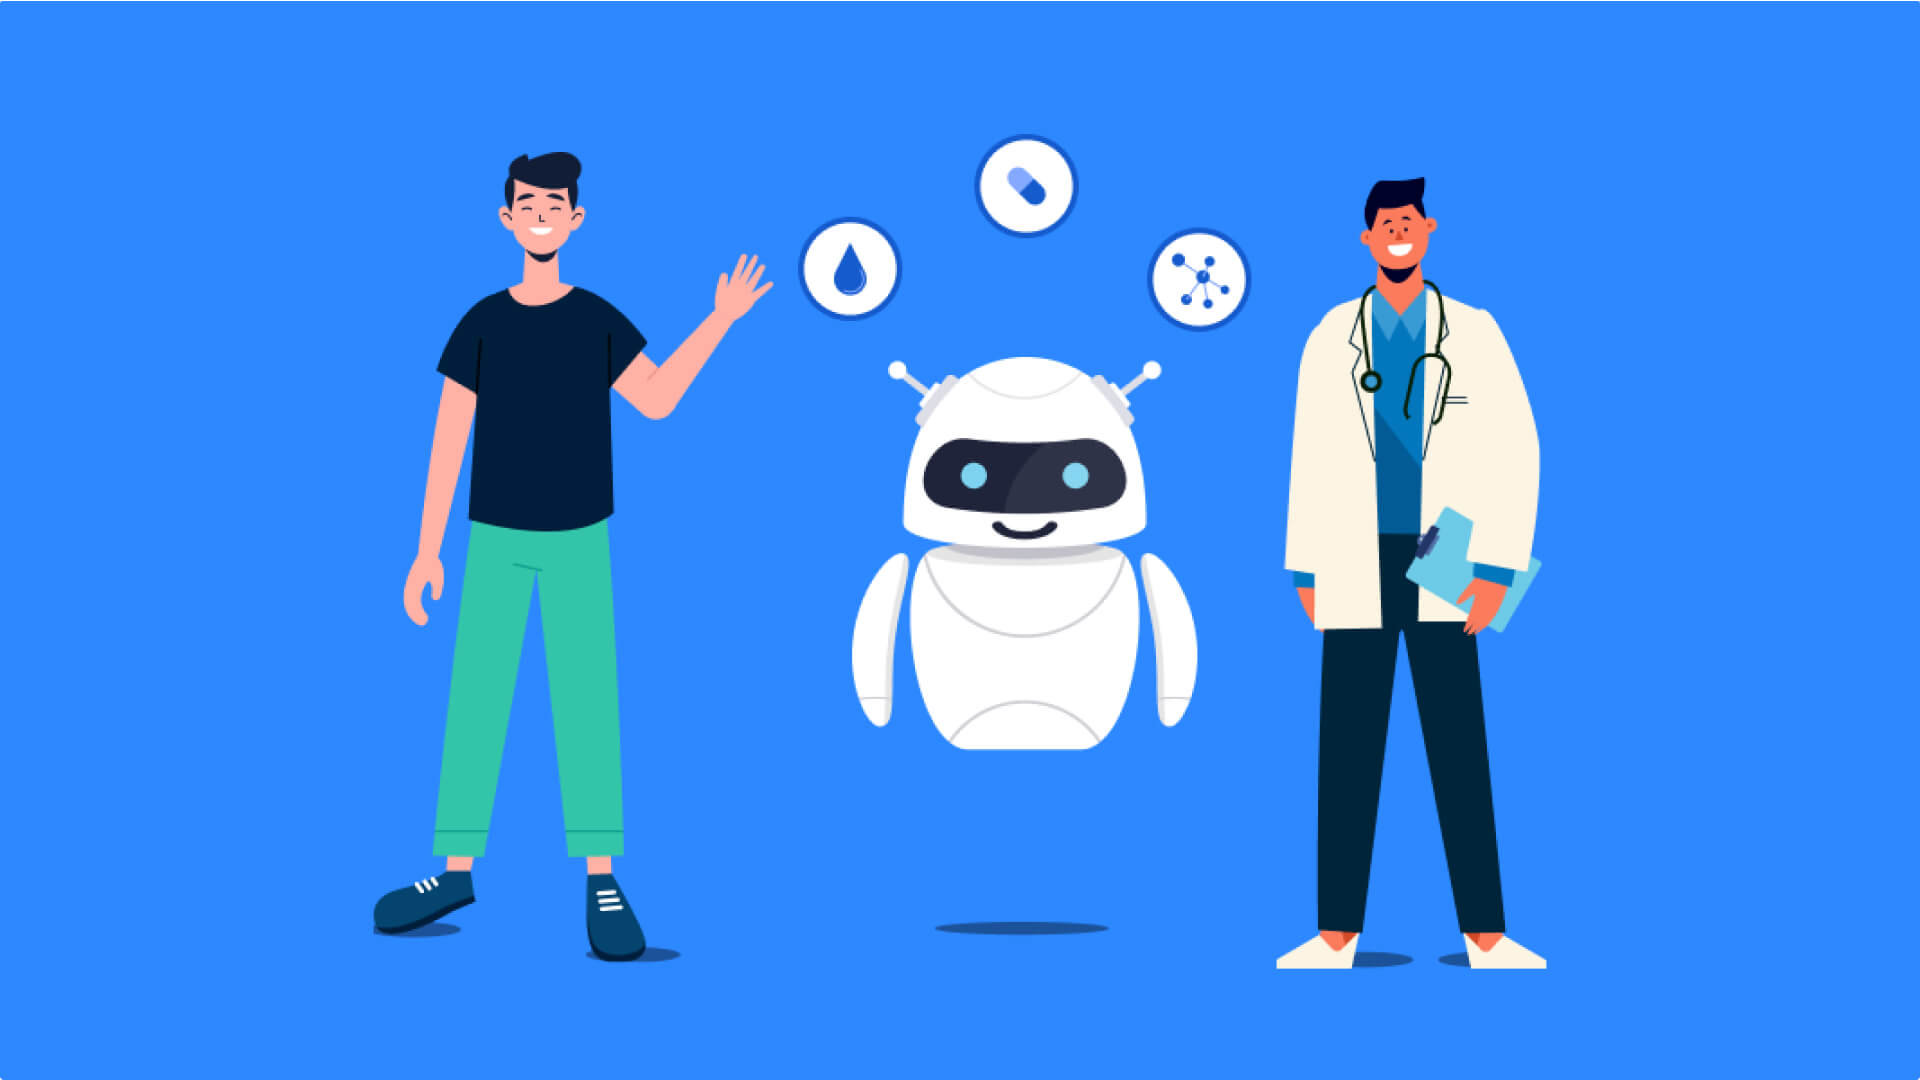 Patient, healthcare chatbot, and doctor characters with medical icons, representing the future of healthcare chatbots.